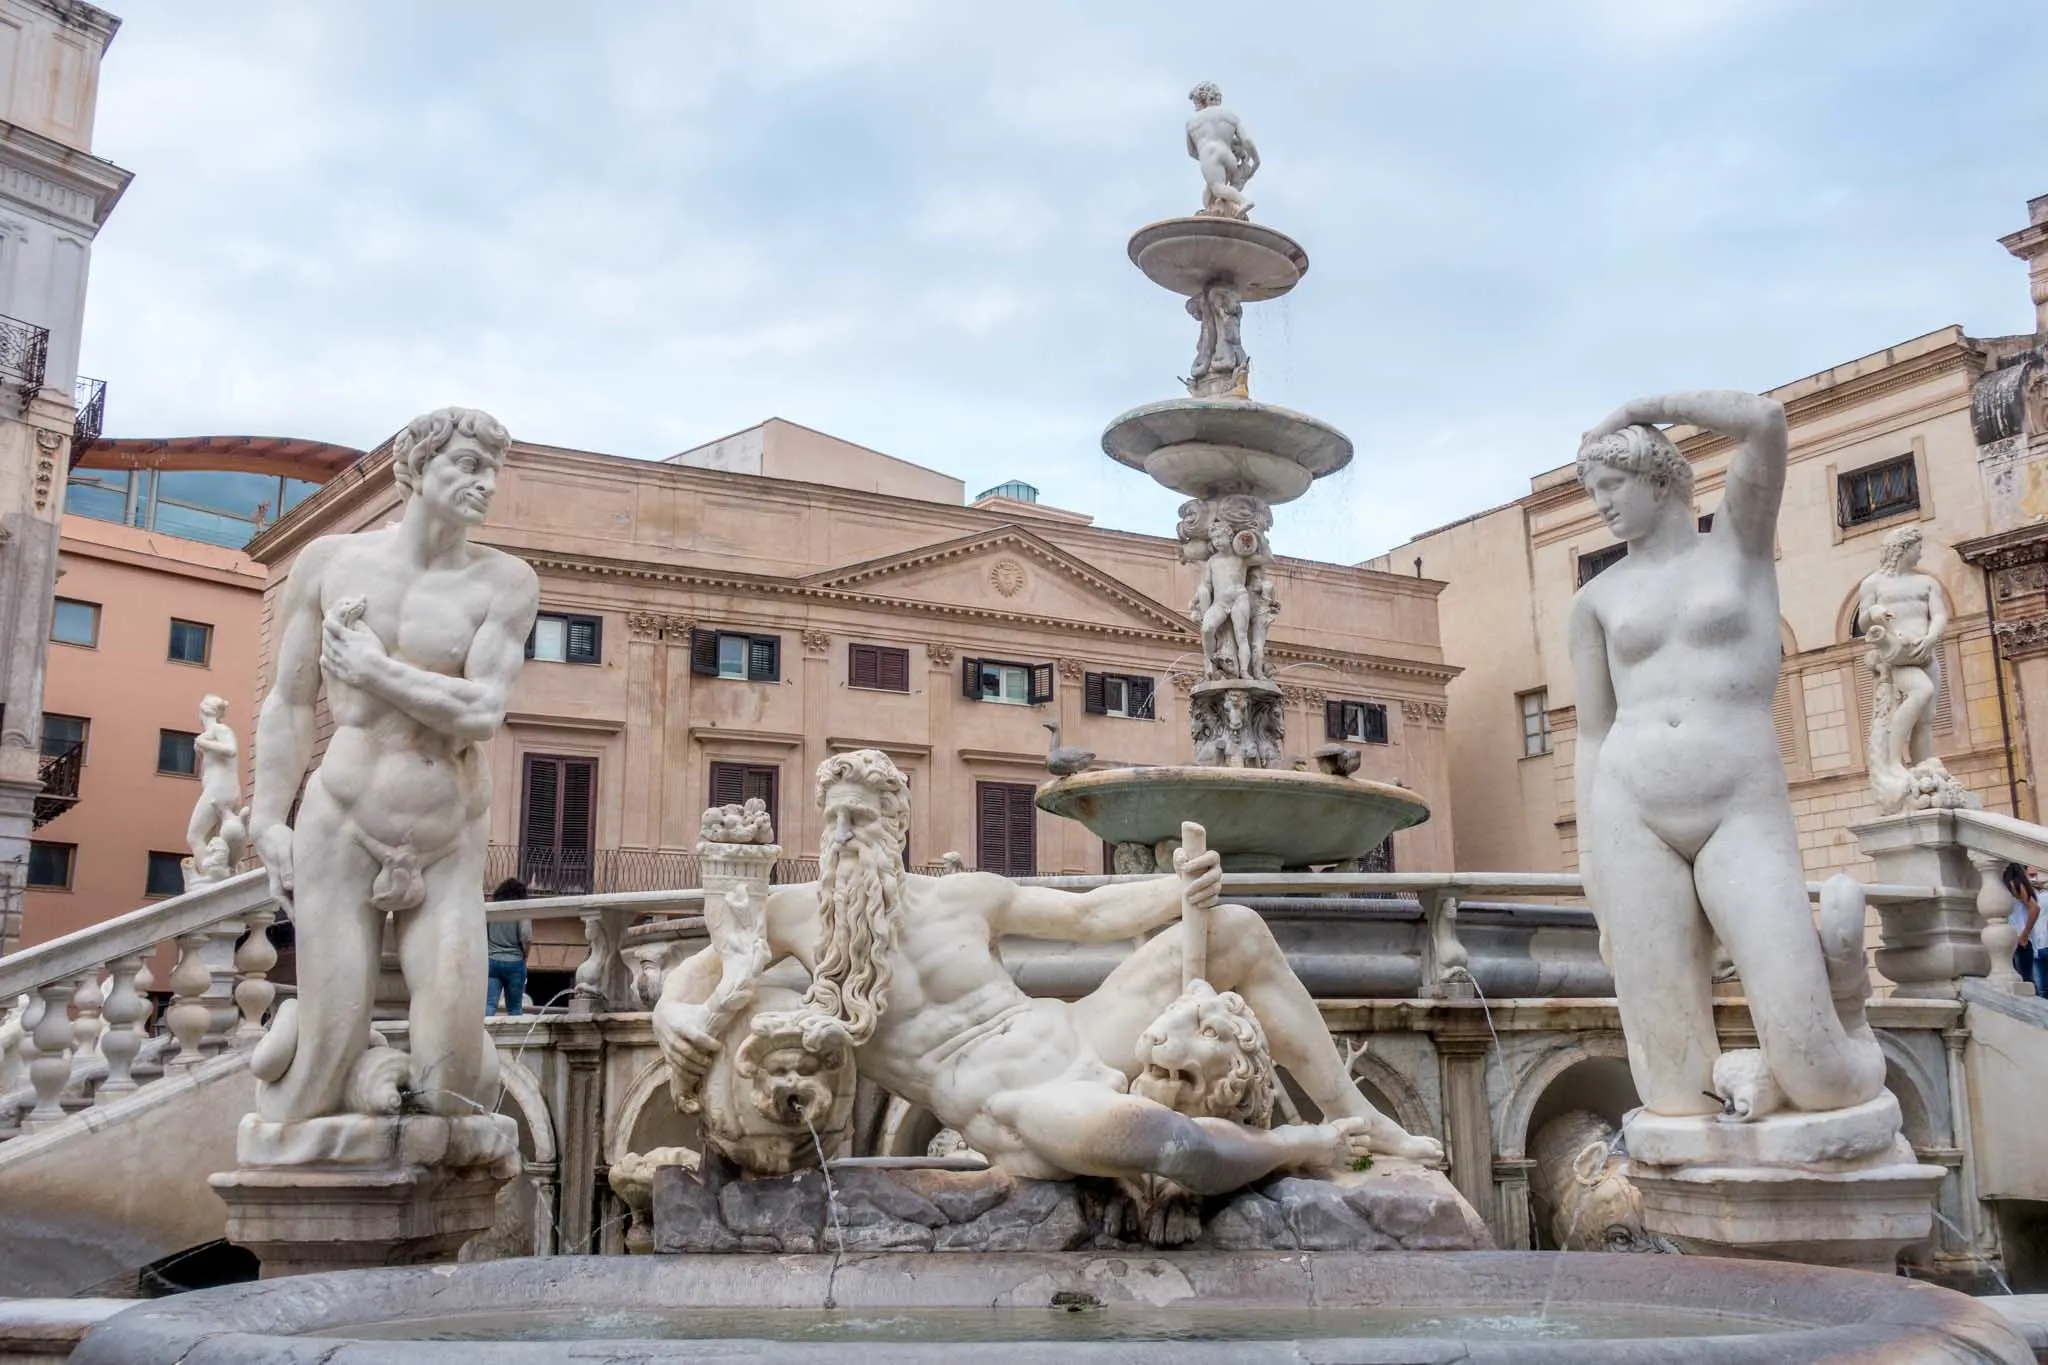 Nude human figures made of marble decorating a fountain.